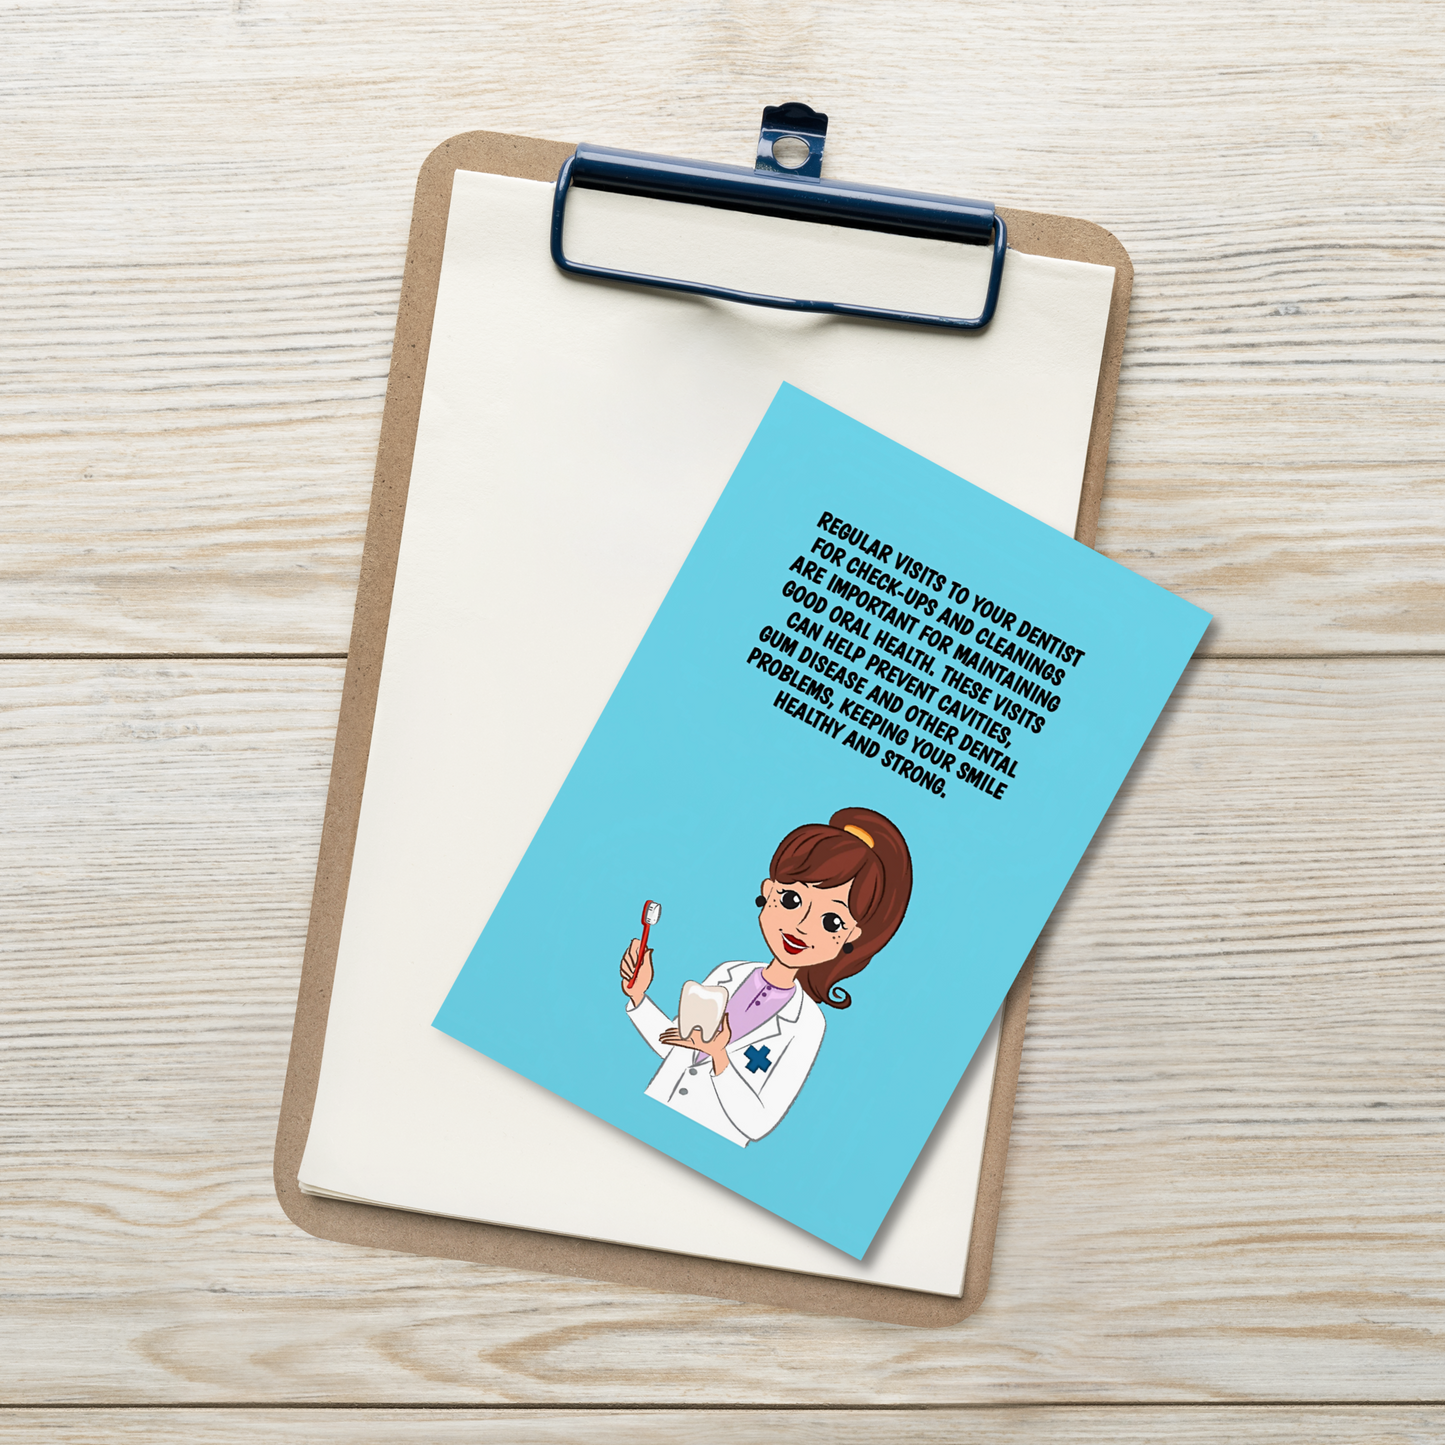 Oral Hygiene Cards- Regular Visits To Your Dentist For Check-Ups And Cleanings Are Essential To Maintain  Good Oral Health